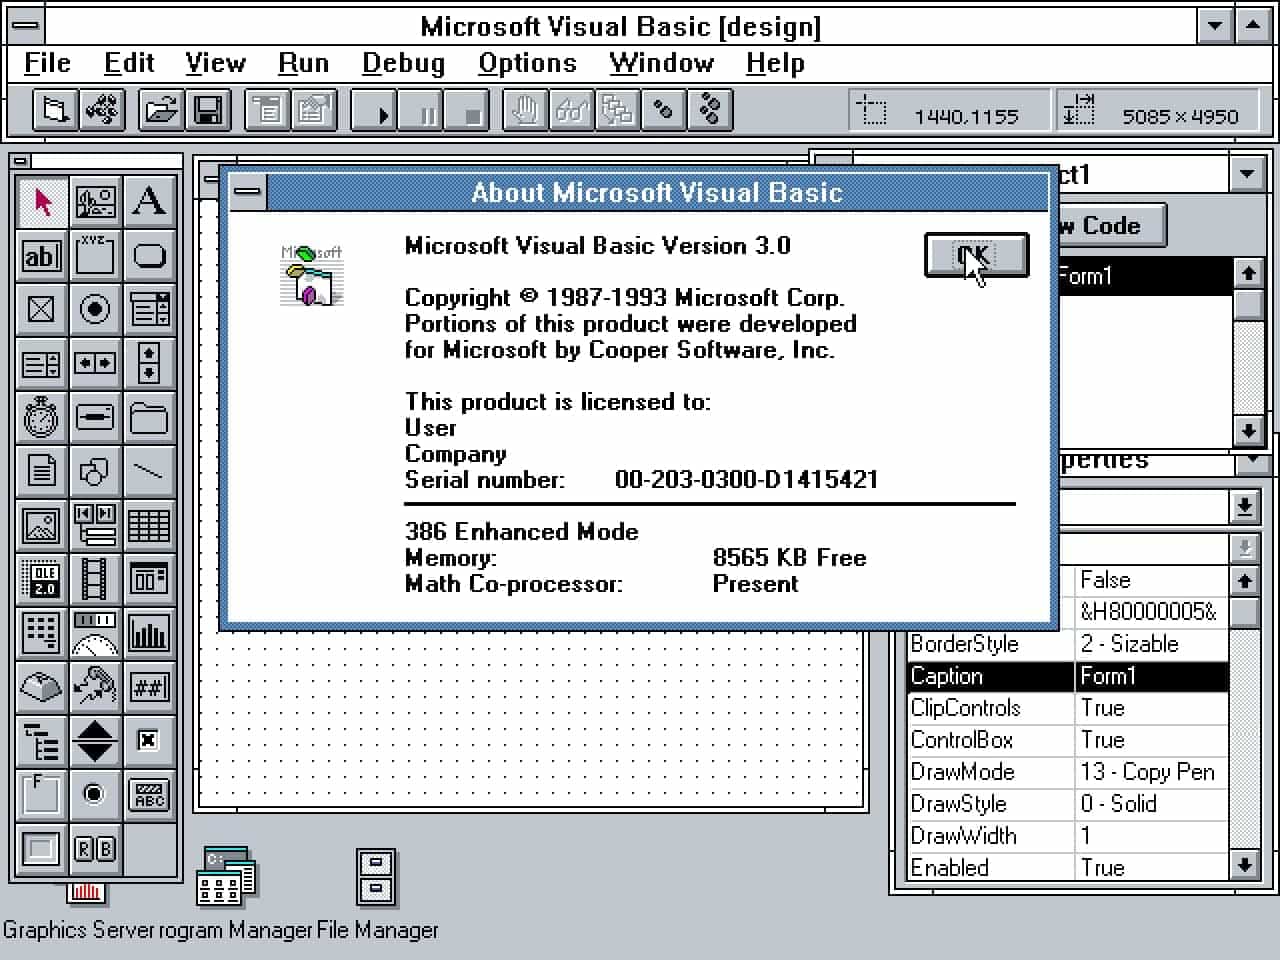 A screenshot showing the Visual Basic 3.0 starting interface. There are 38 buttons in the left panel. There's also a row of buttons on the top of the screen.